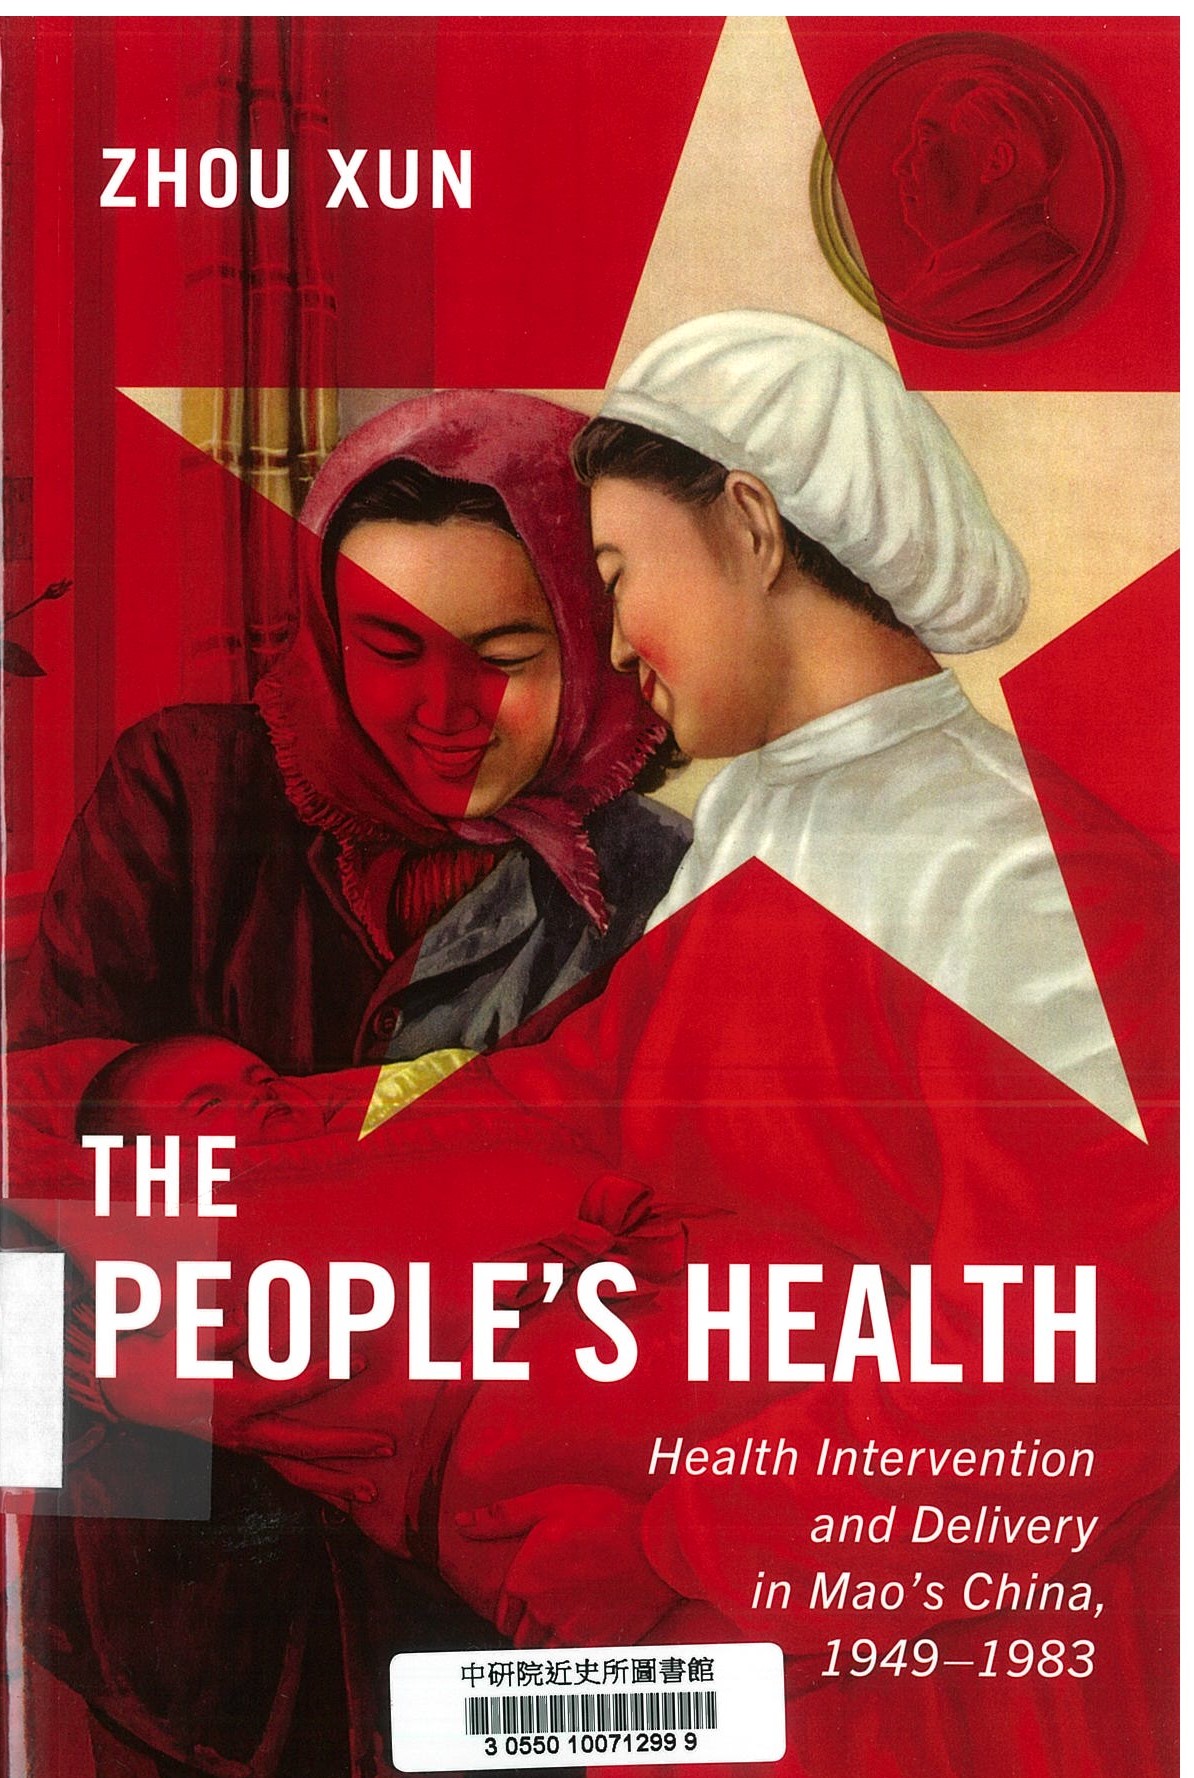 The people's health : health intervention and delivery in Mao's China, 1949-1983